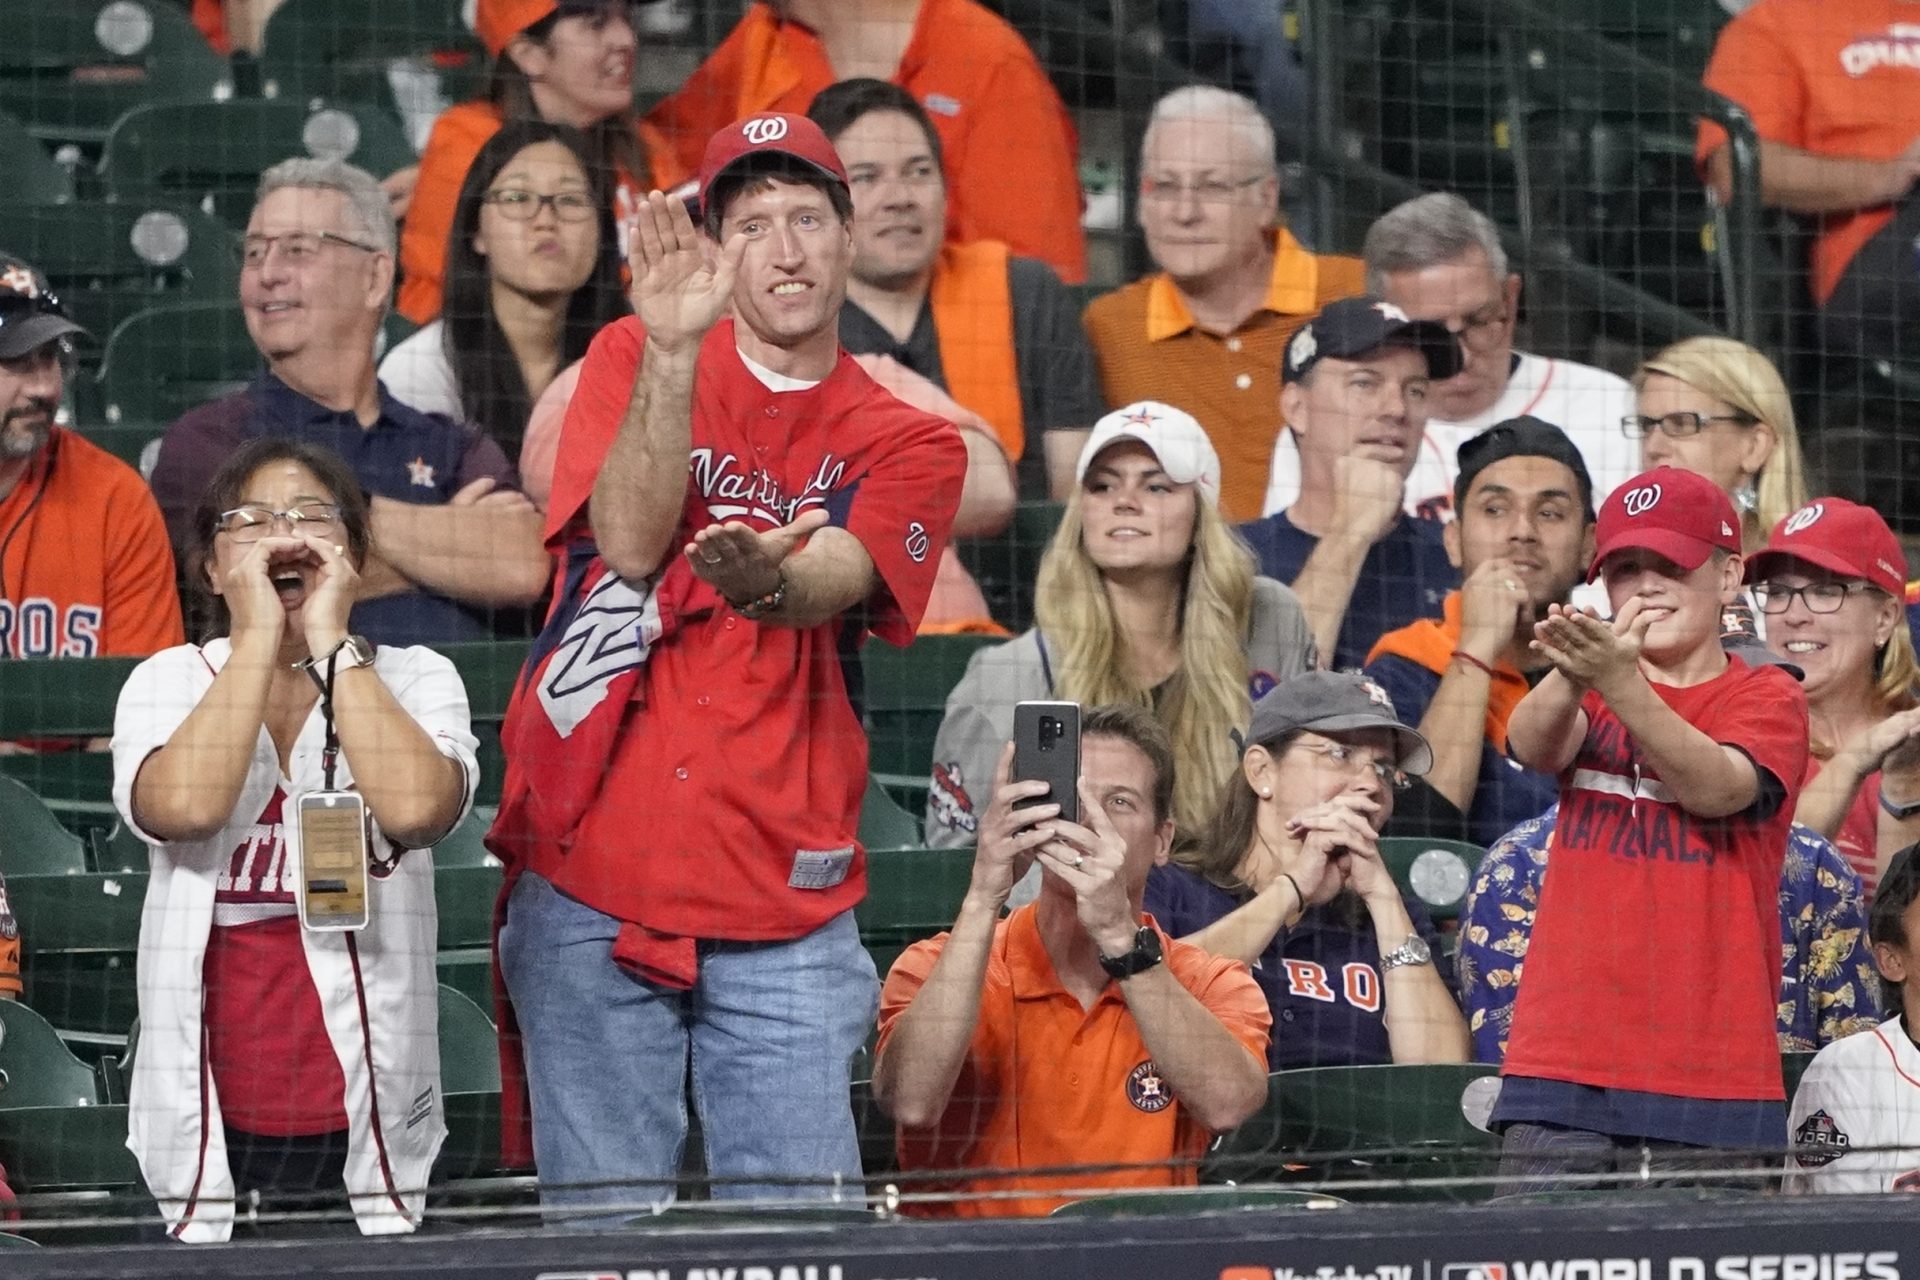 Fans gesture the baby shark as Washington Nationals' Gerardo Parra bats during the ninth inning of Game 2 of the baseball World Series against the Houston Astros Wednesday, Oct. 23, 2019, in Houston.